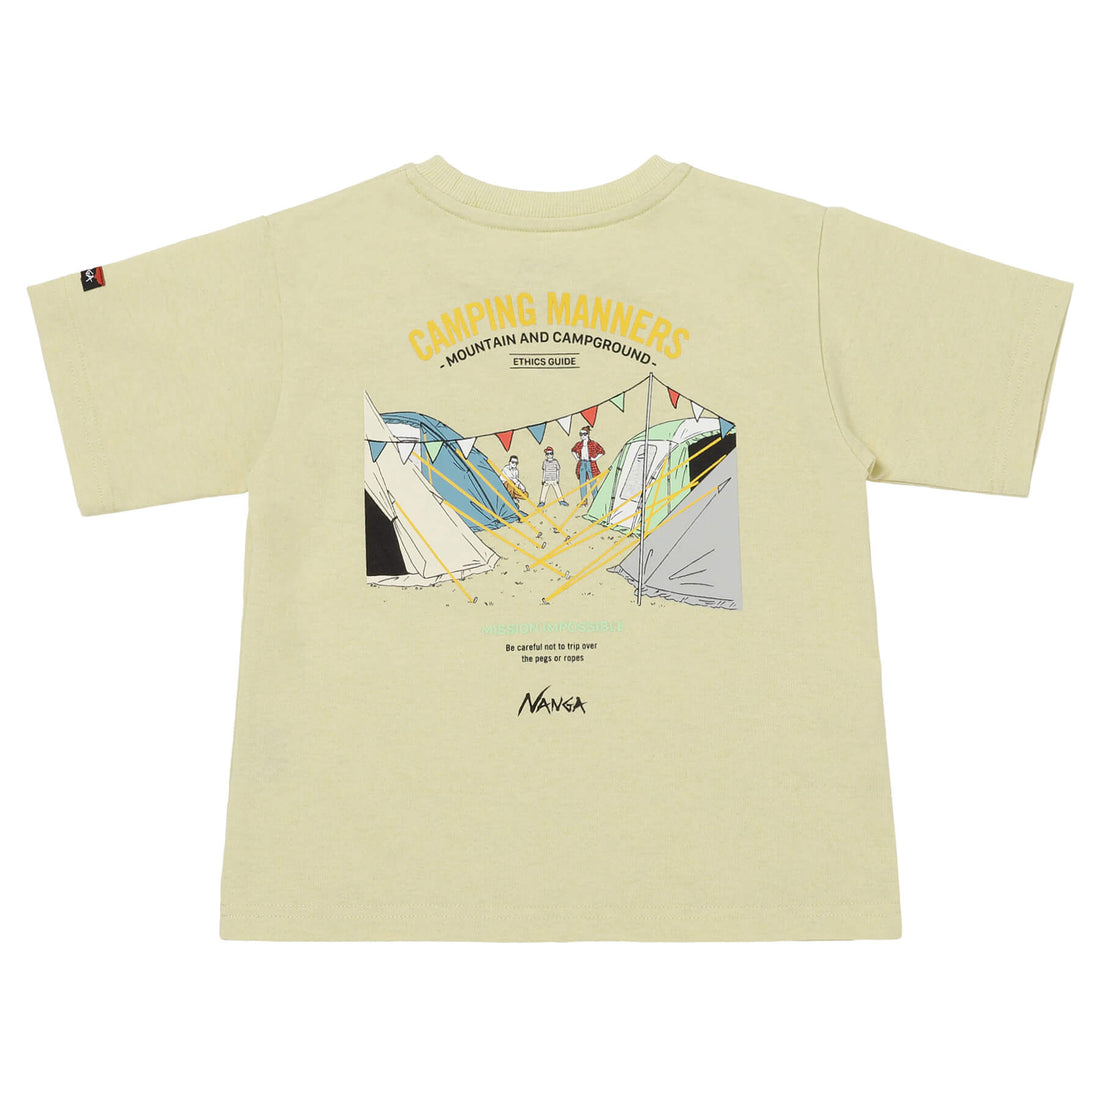 ECO HYBRID CAMPING MANNERS PEG&ROPE KIDS TEE / エコハイブリッド キャンピングマナー ペグ&ロープ キッズキッズティー(キッズ)